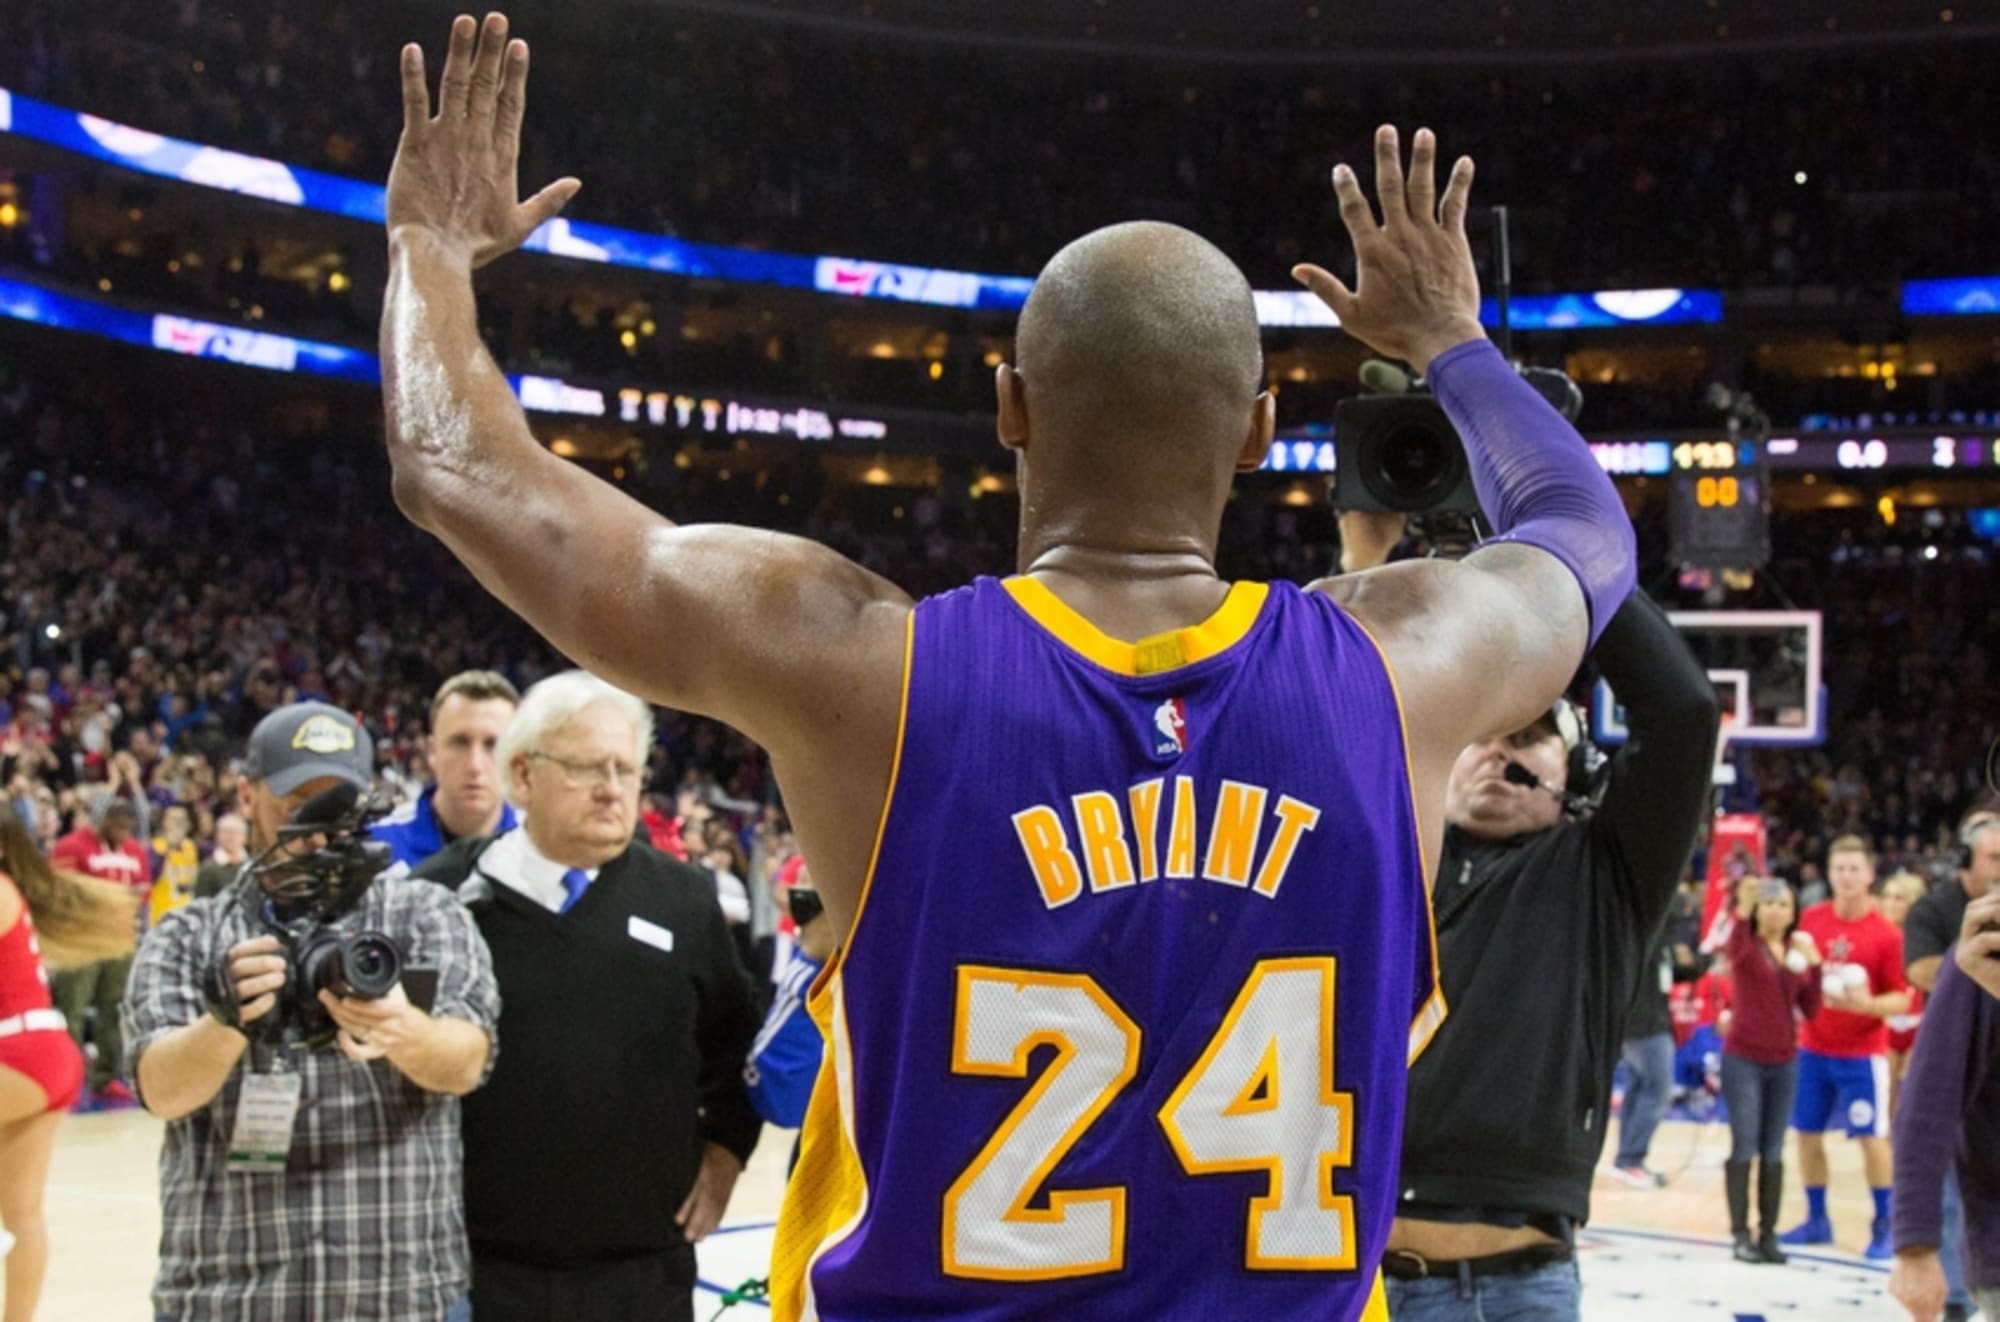 The untold story of Kobe Bryant's 81 points: I sat him down so he